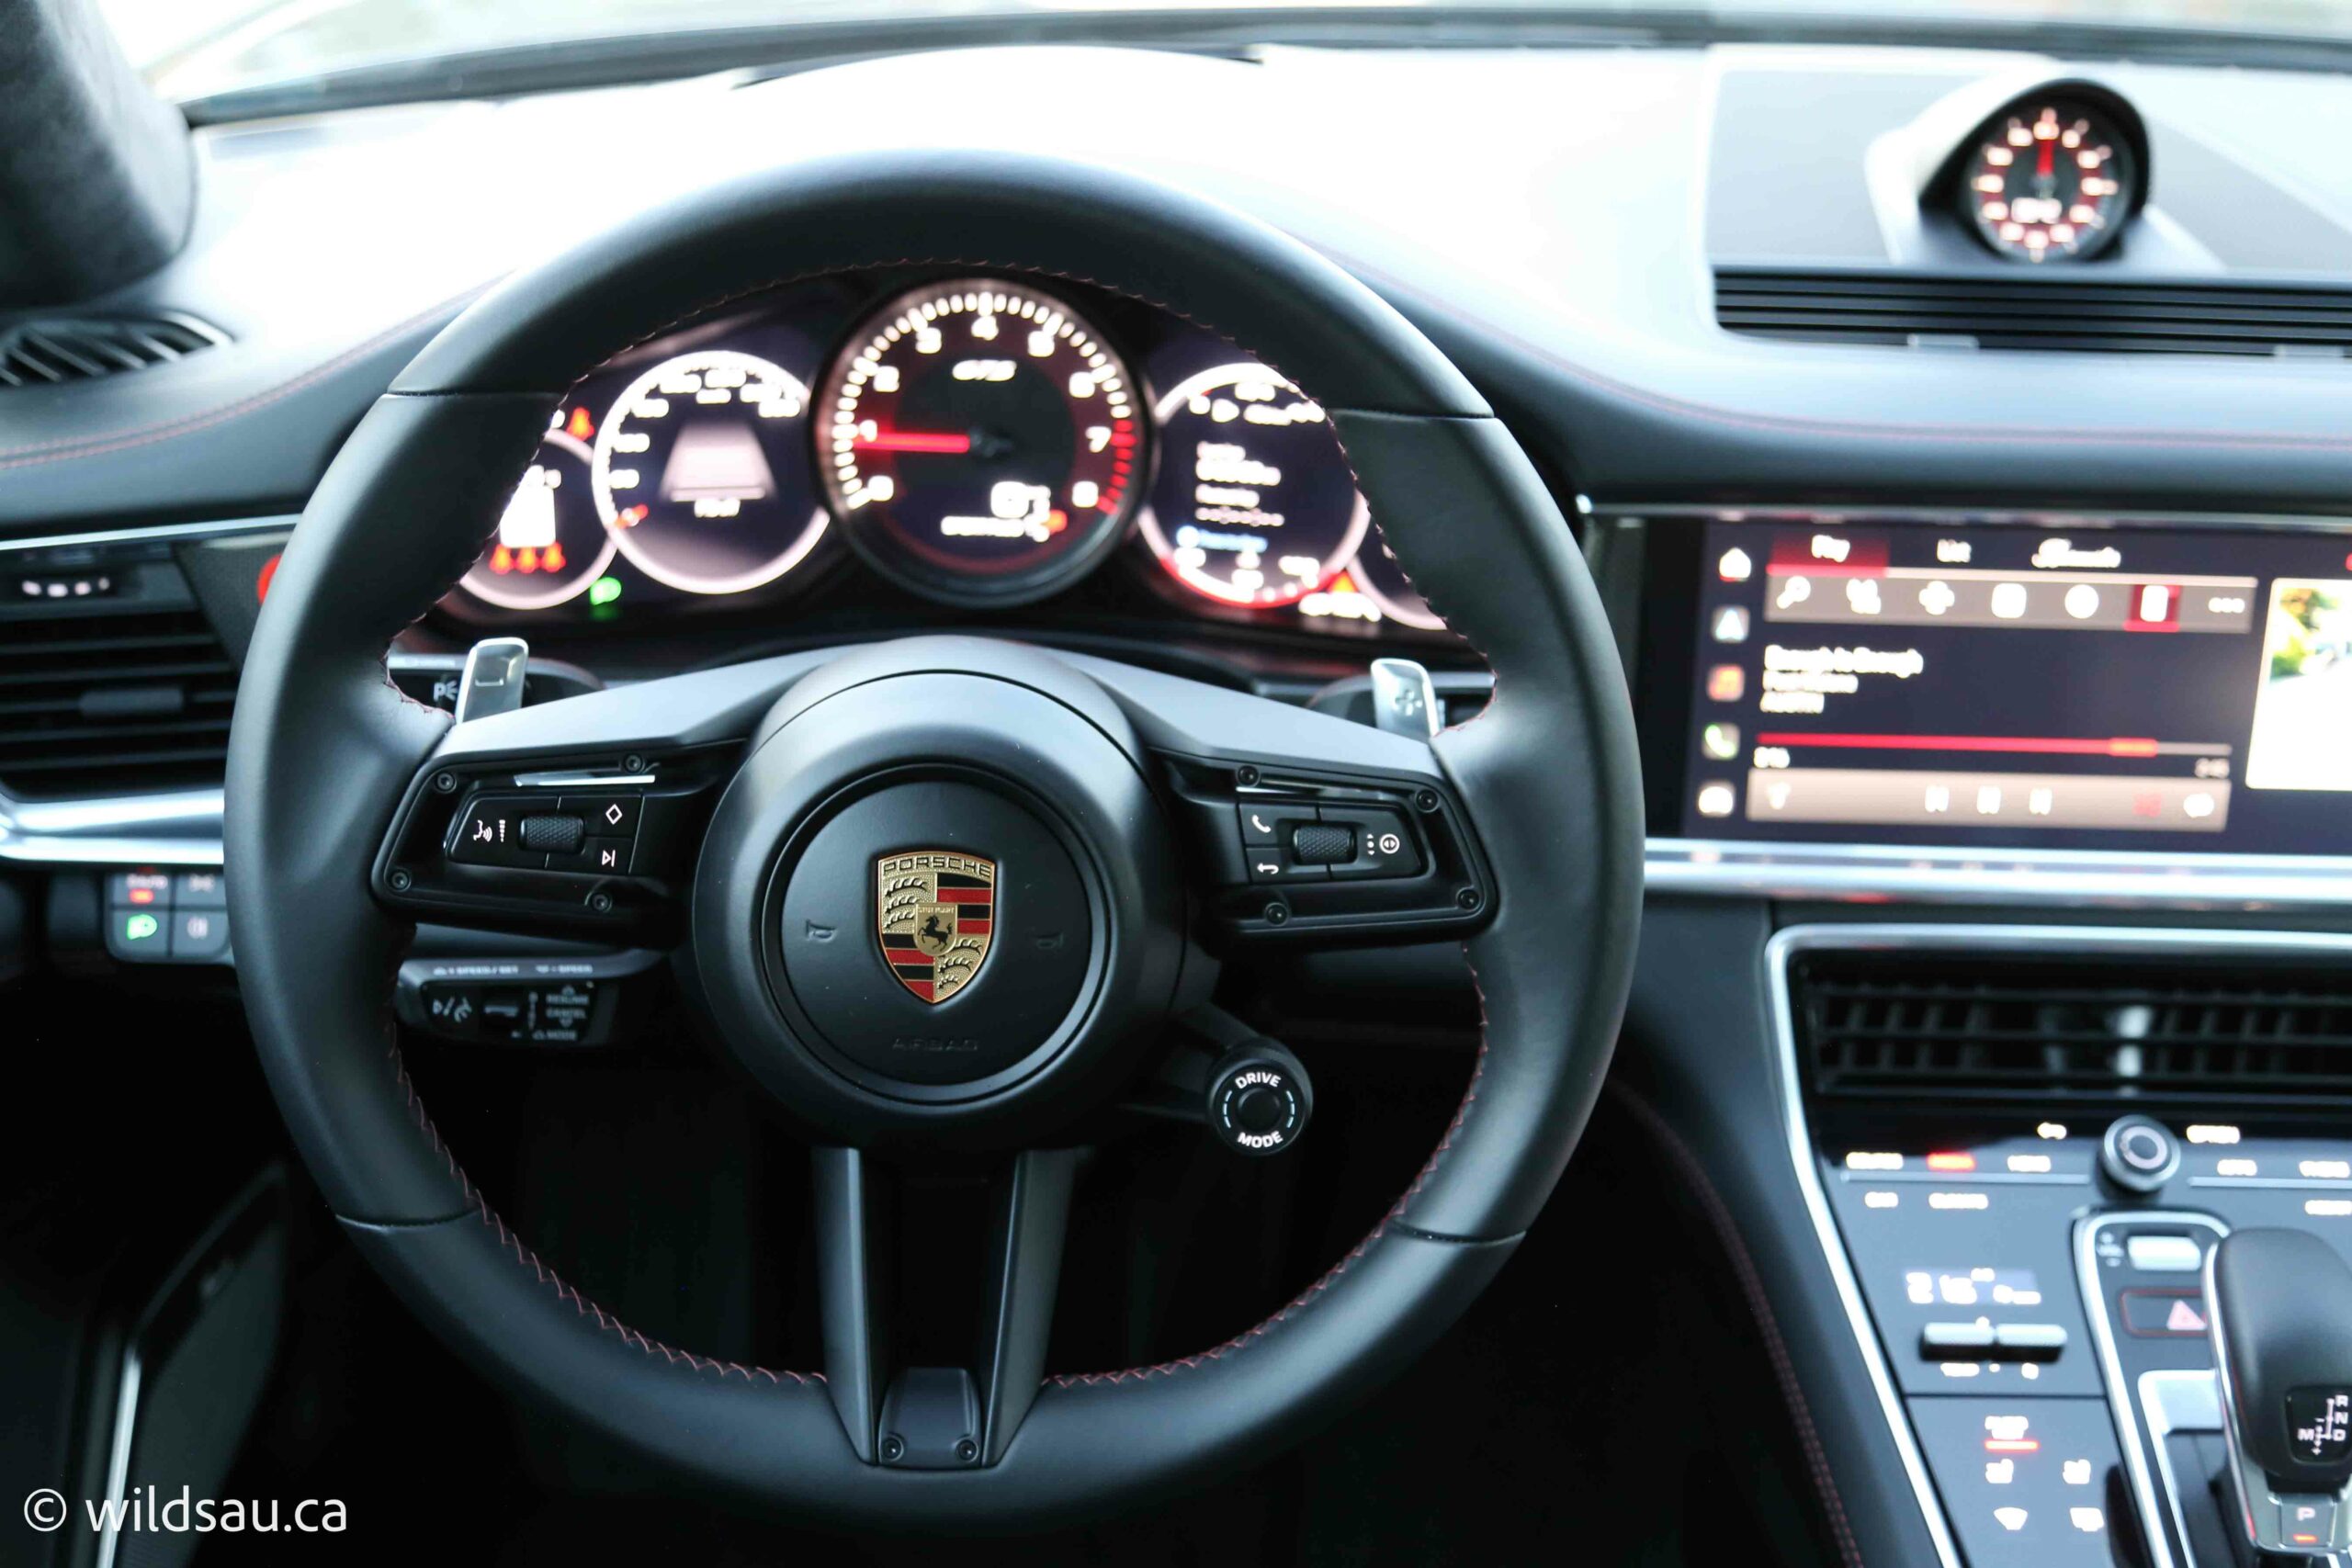 Porsche Driver Experience in the new Panamera with driver-centred interior  concept - Porsche Newsroom